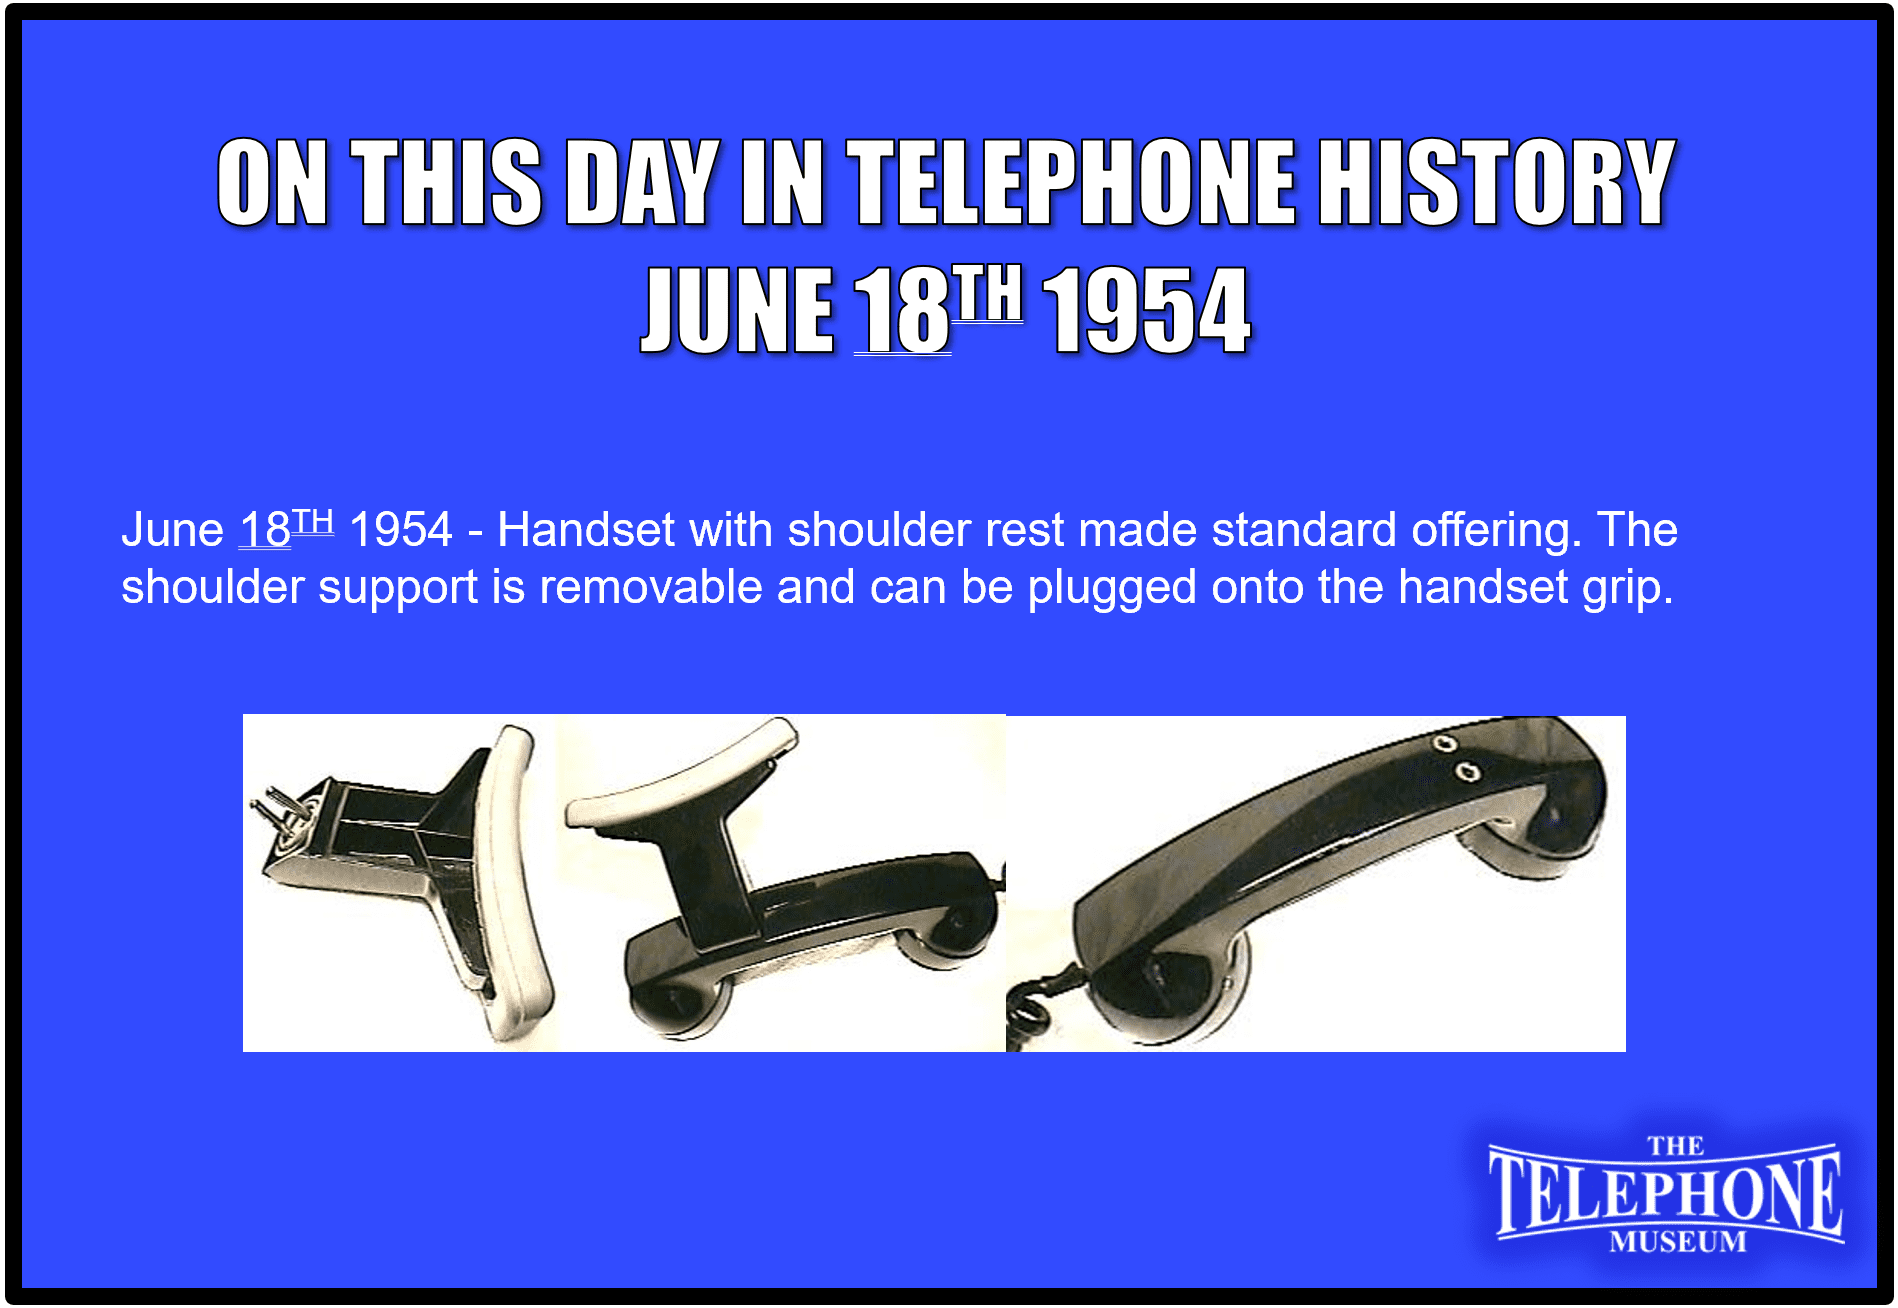 On This Day in Telephone History June 18TH 1954 Handset with shoulder rest made standard offering. The shoulder support is removable and can be plugged onto the handset grip.